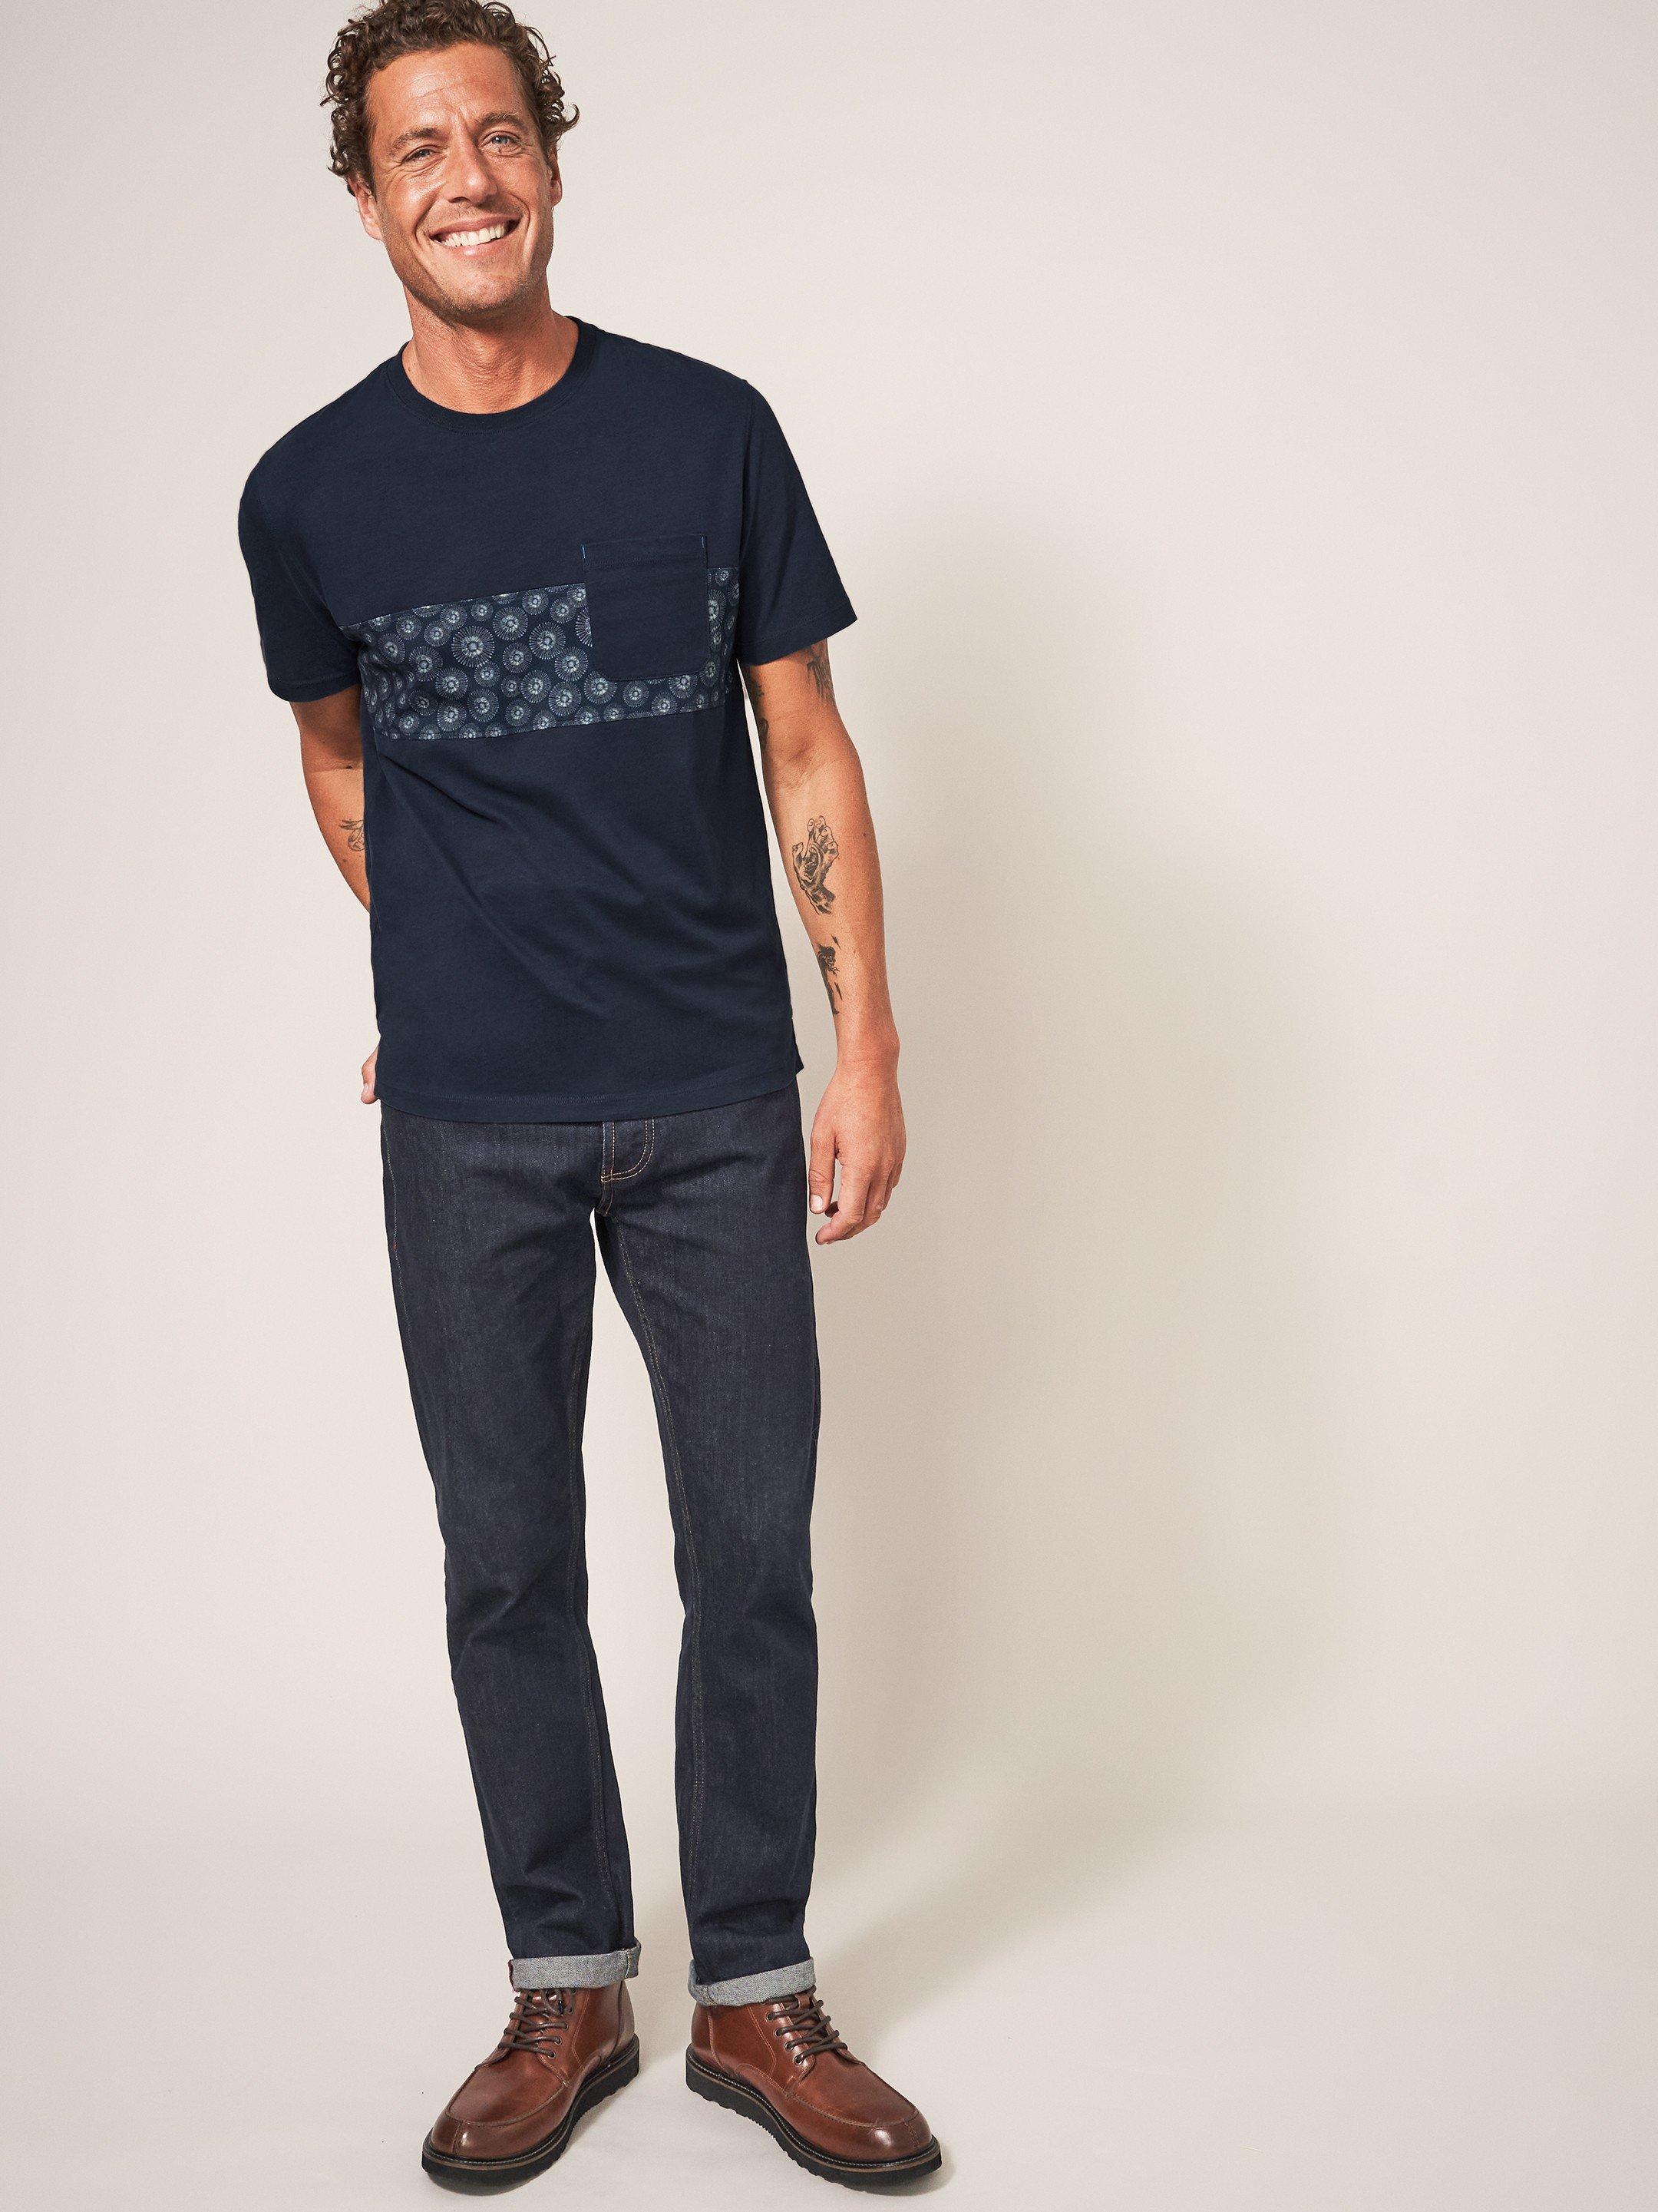 Hines Circle Graphic Tshirt in DARK NAVY - MODEL FRONT